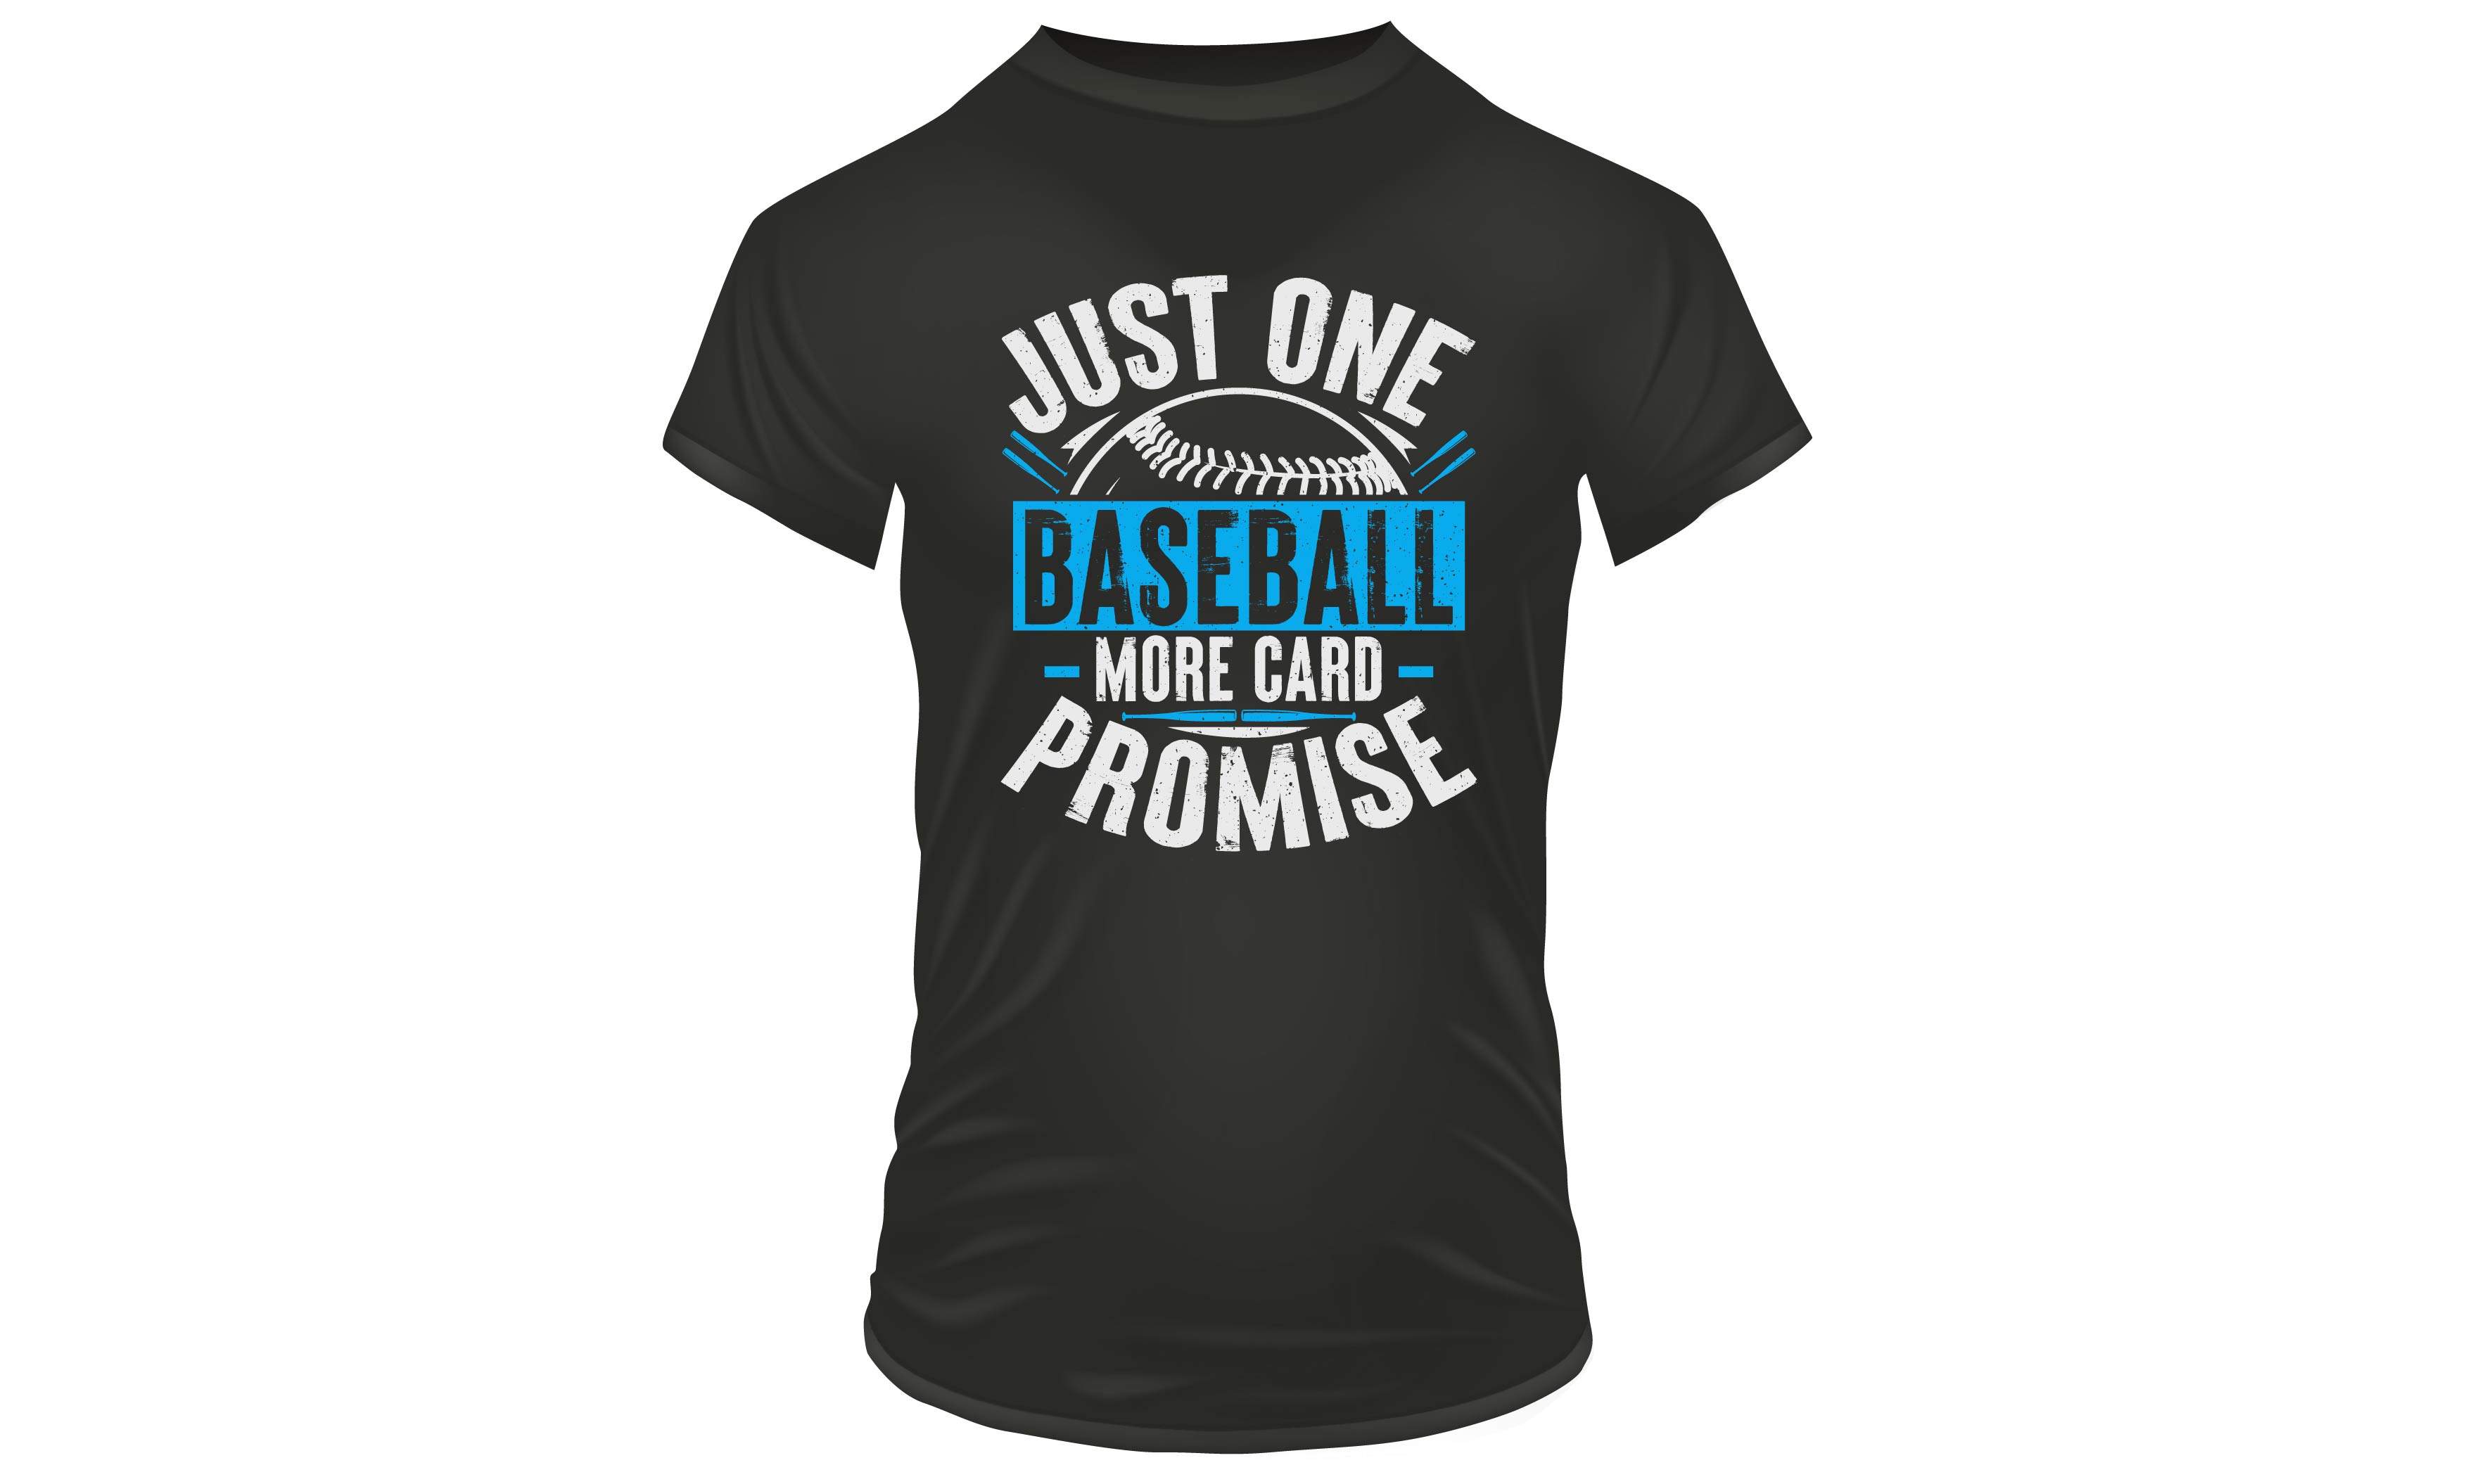 Black t - shirt that says just one baseball more card and a promise.